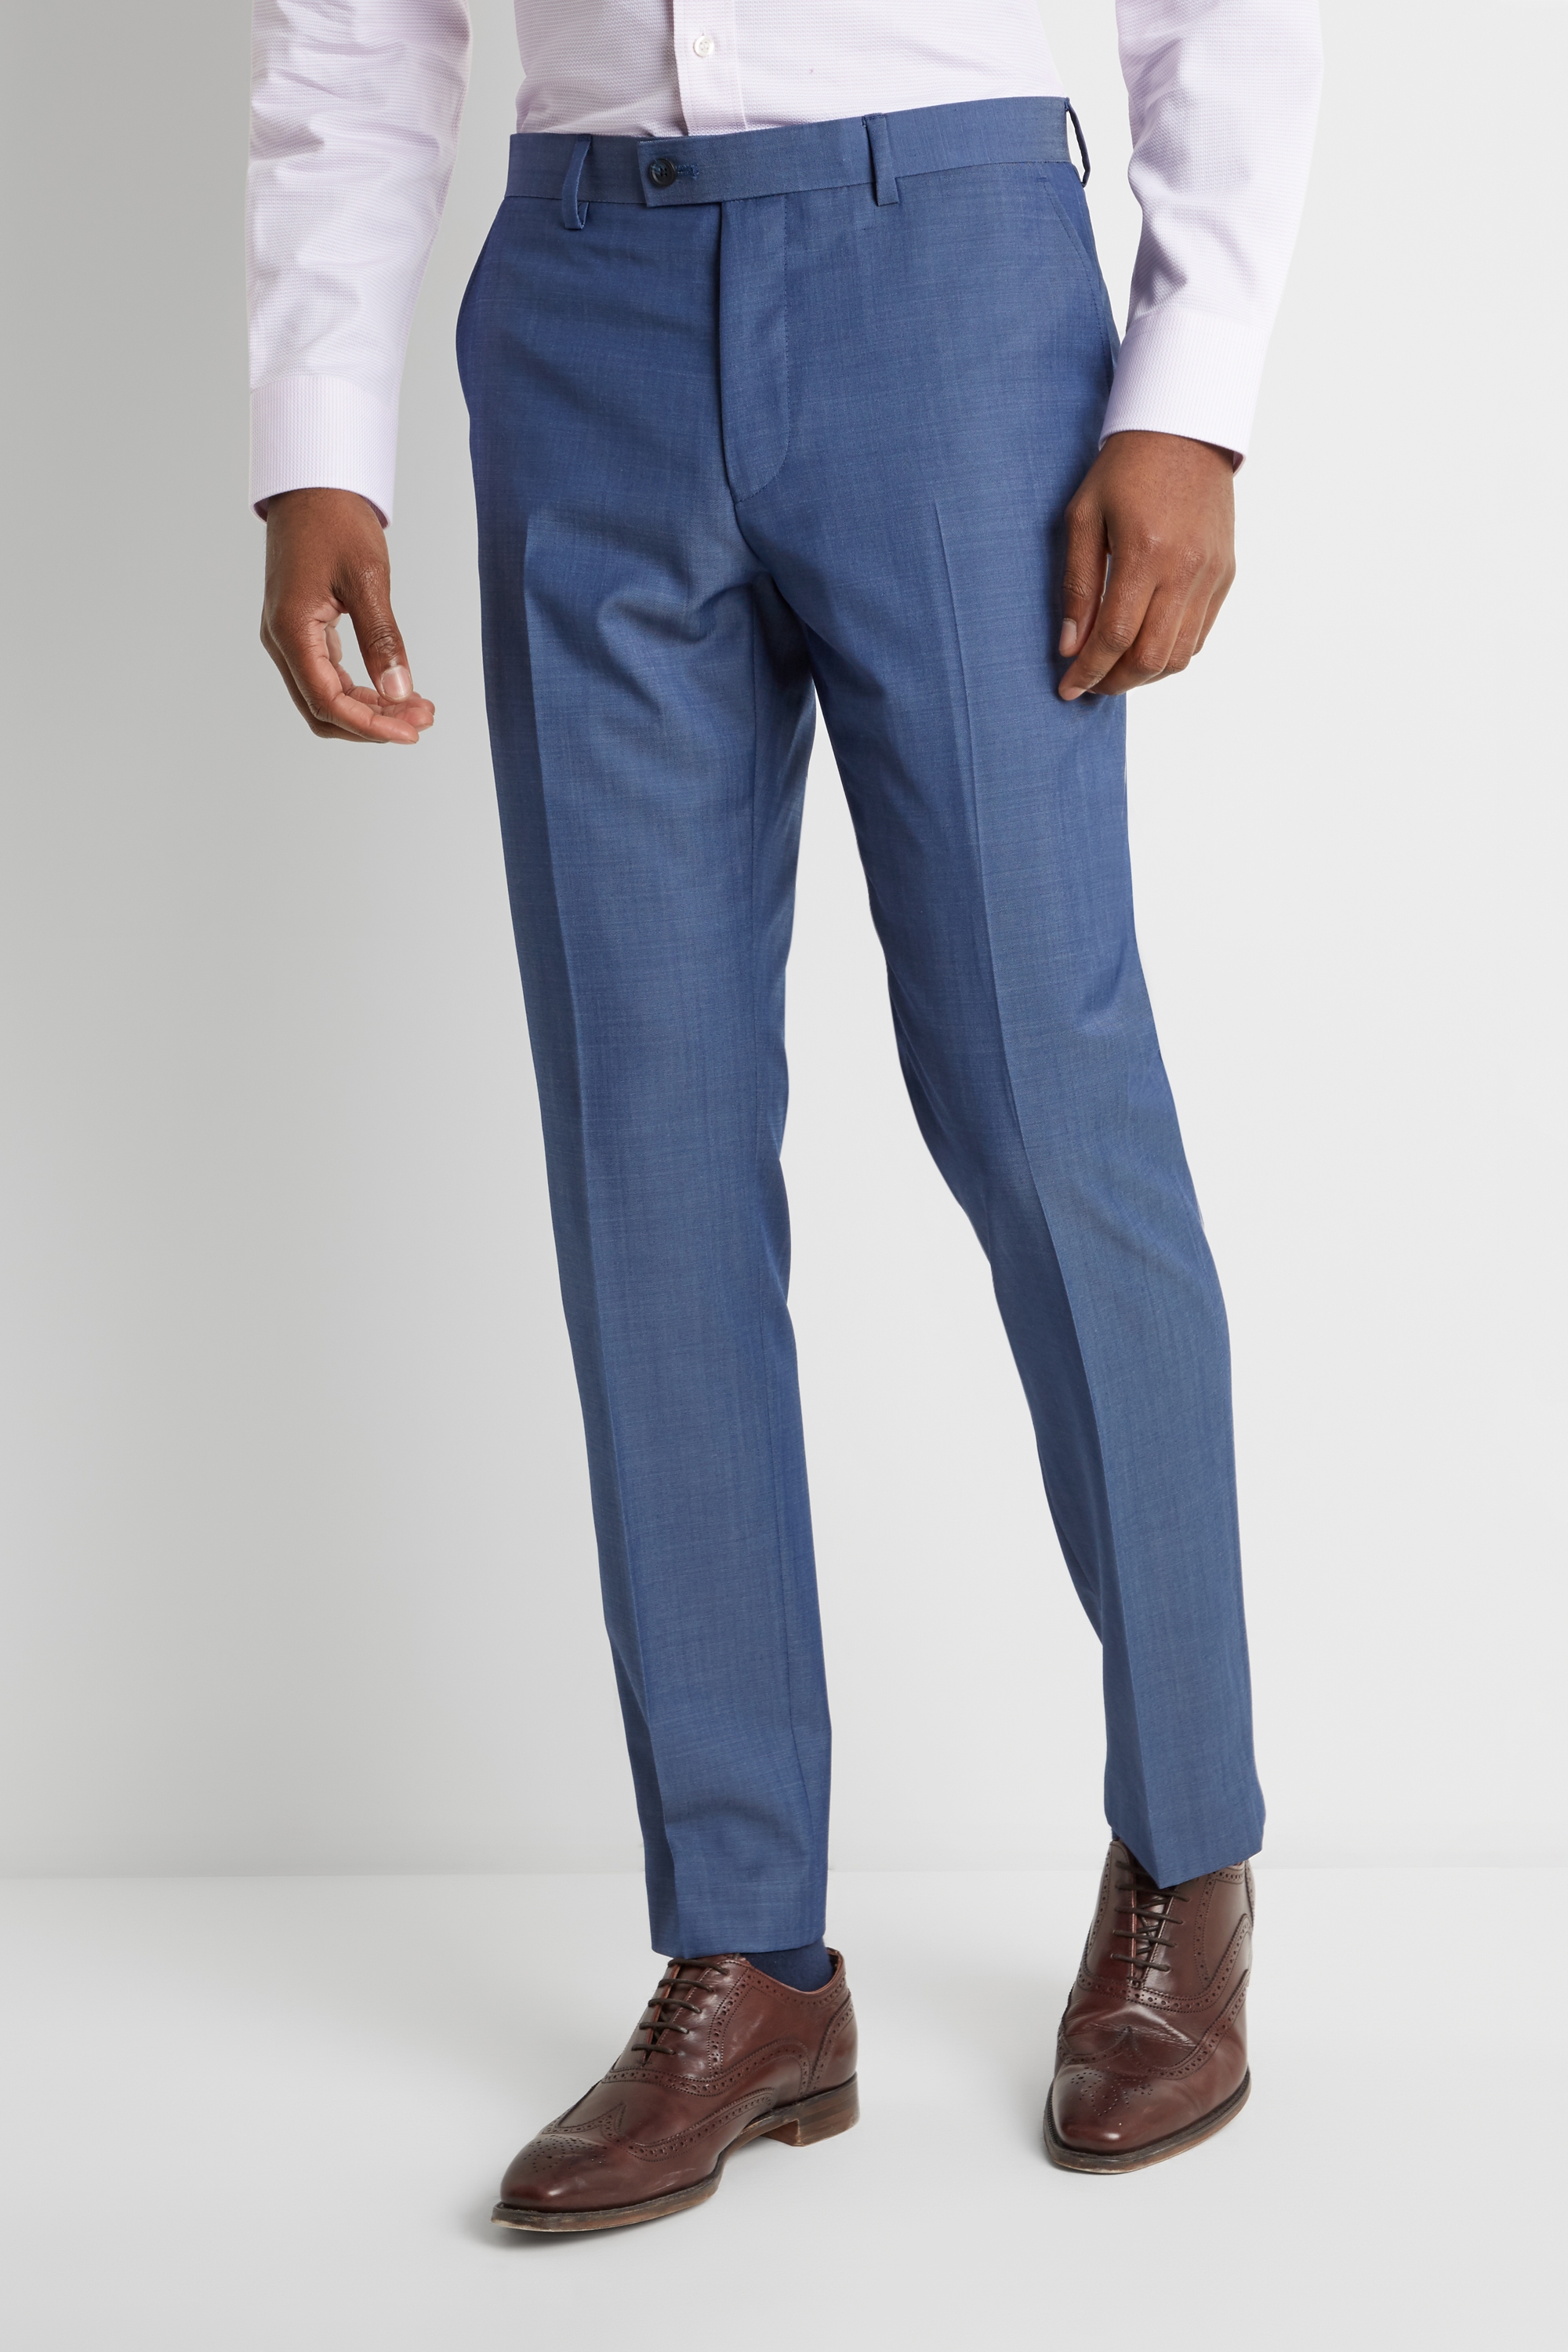 Ted Baker Tailored Fit Faded Blue Twill Trousers | Buy Online at Moss